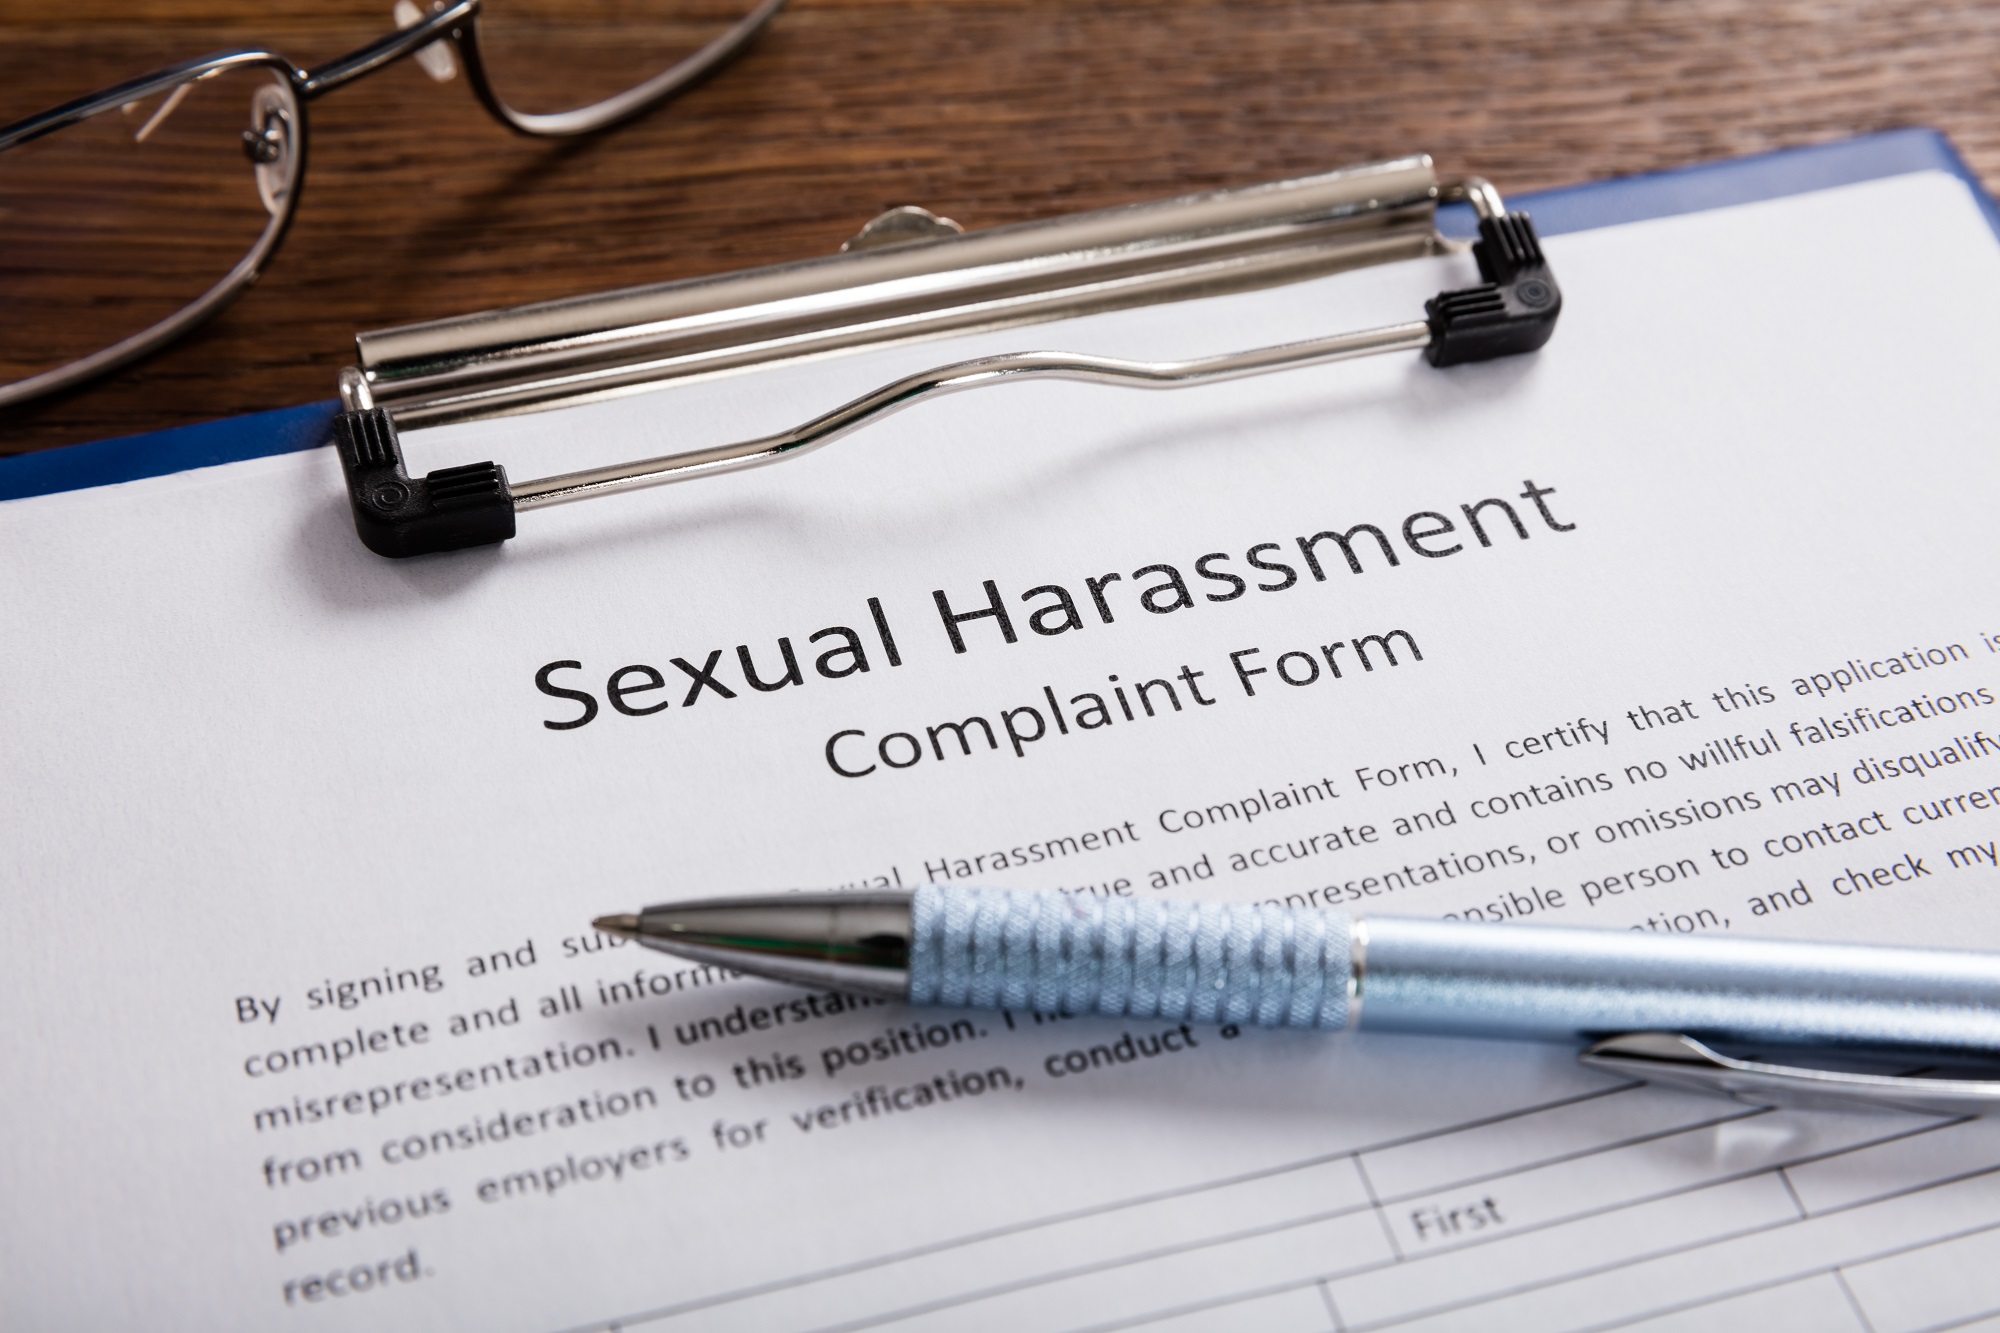 Sexual harassment at work: new law and proposed new guidance